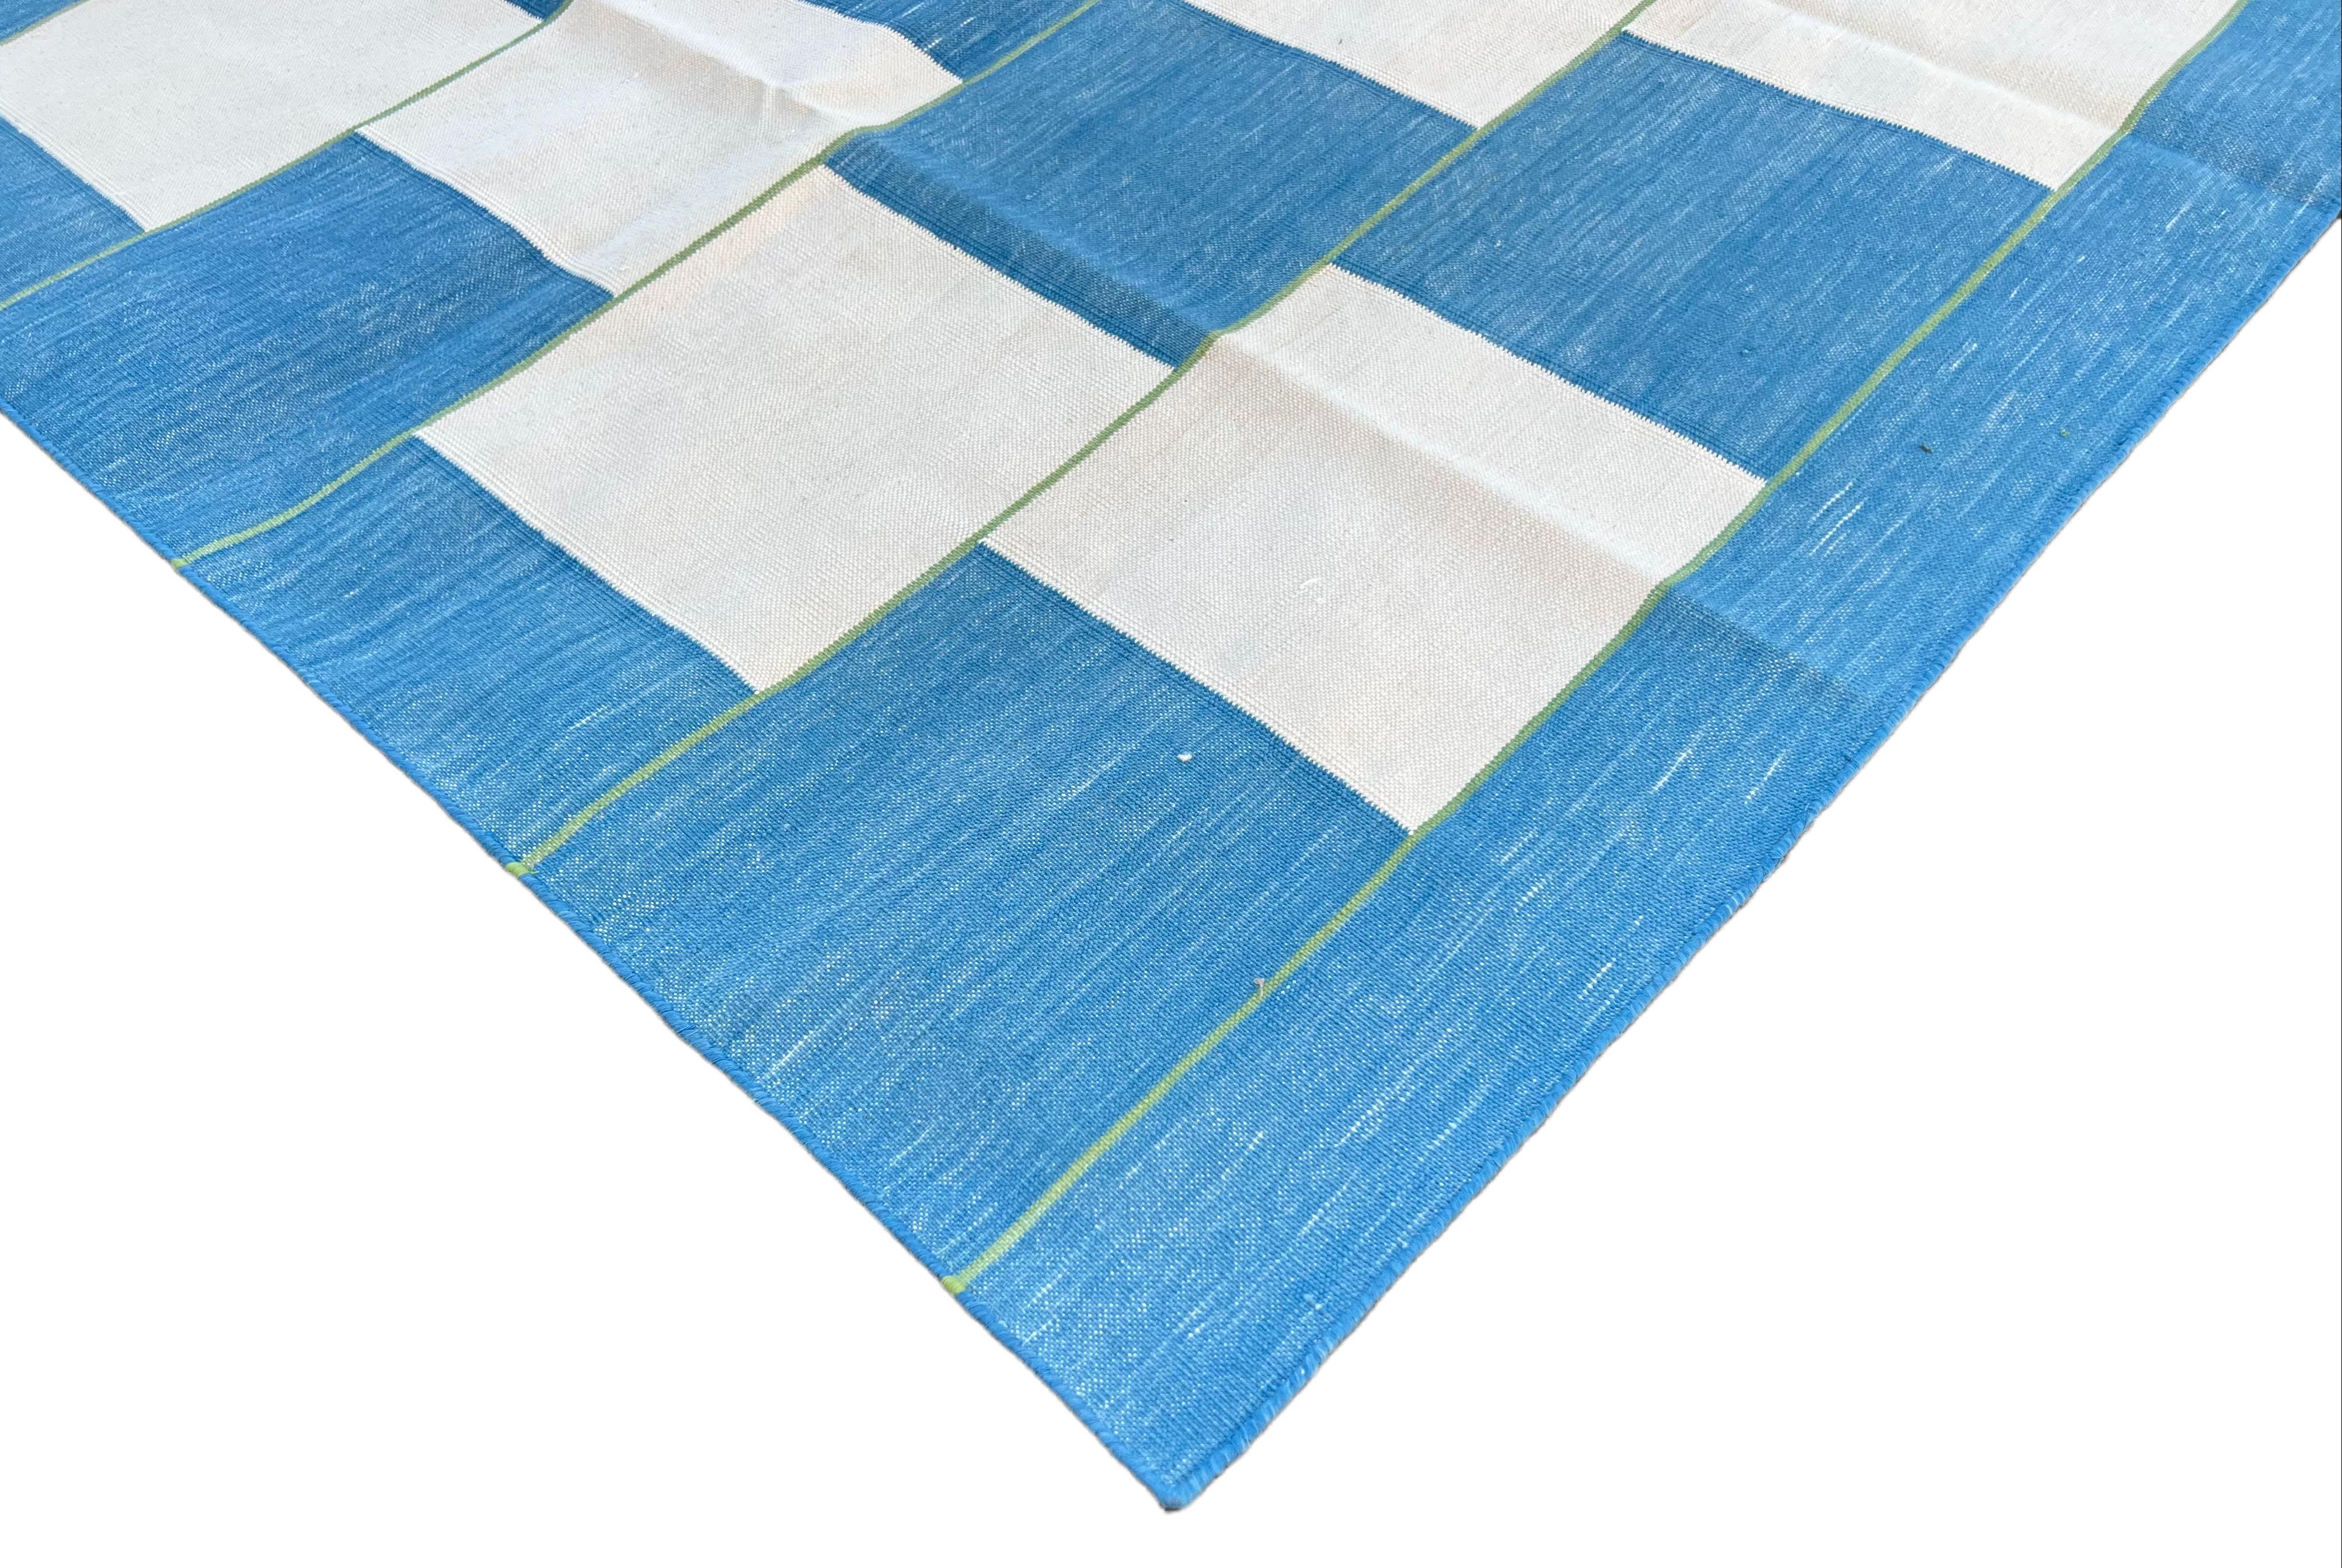 Cotton Vegetable Dyed Sky Blue And White Checked Indian Dhurrie Rug-5'x8'

These special flat-weave dhurries are hand-woven with 15 ply 100% cotton yarn. Due to the special manufacturing techniques used to create our rugs, the size and color of each